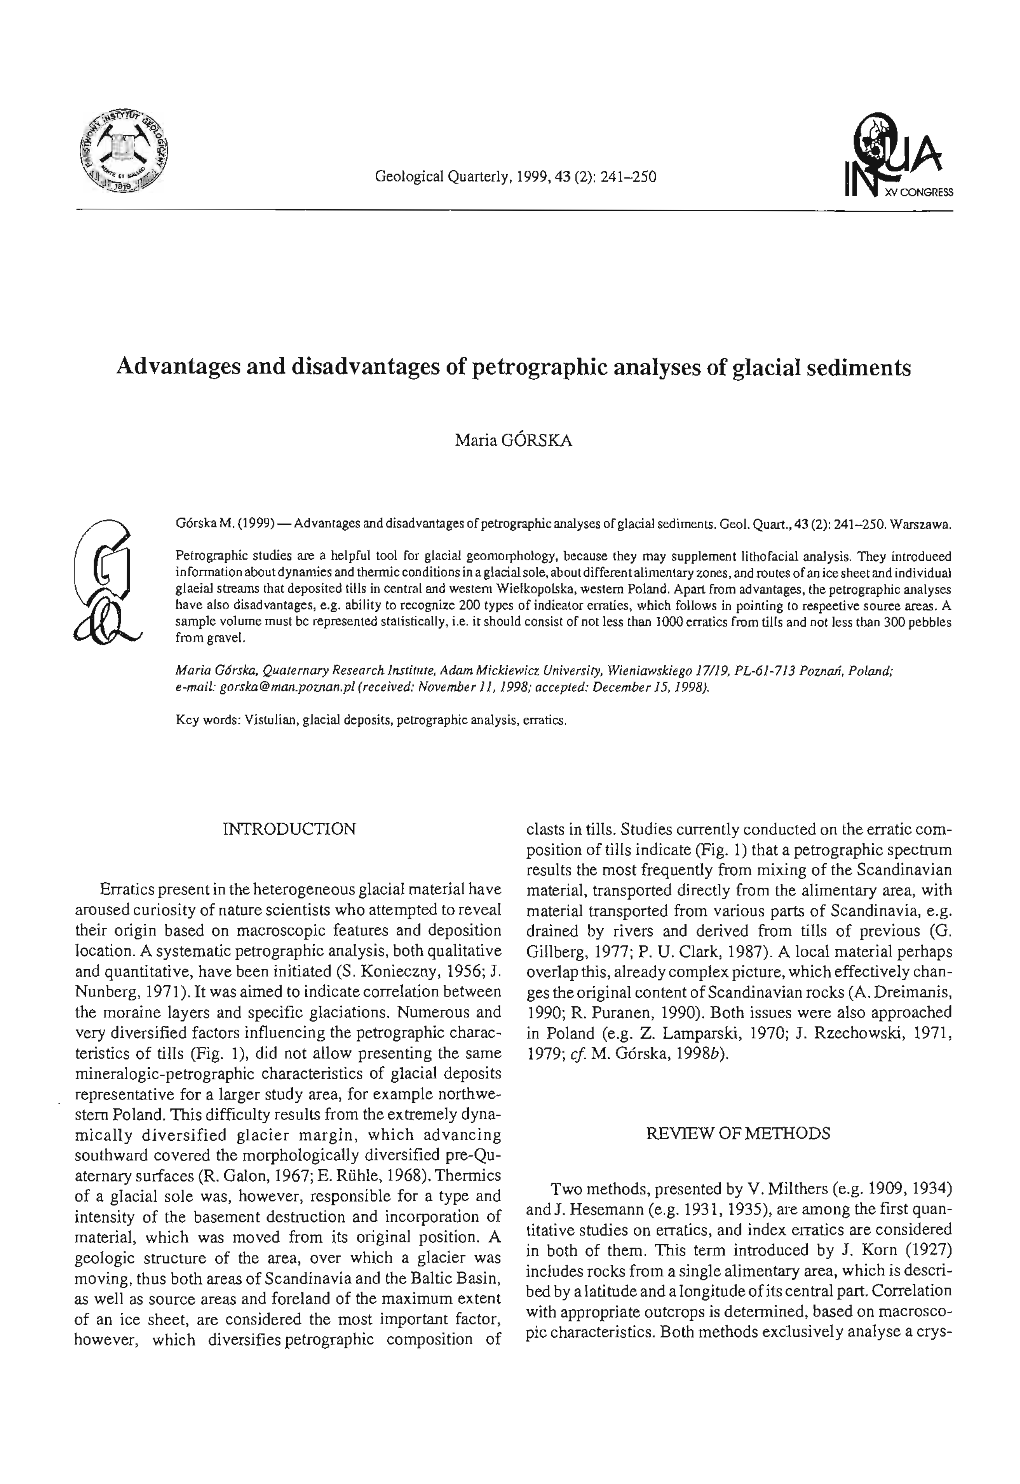 Advantages and Disadvantages of Petrographic Analyses of Glacial Sediments